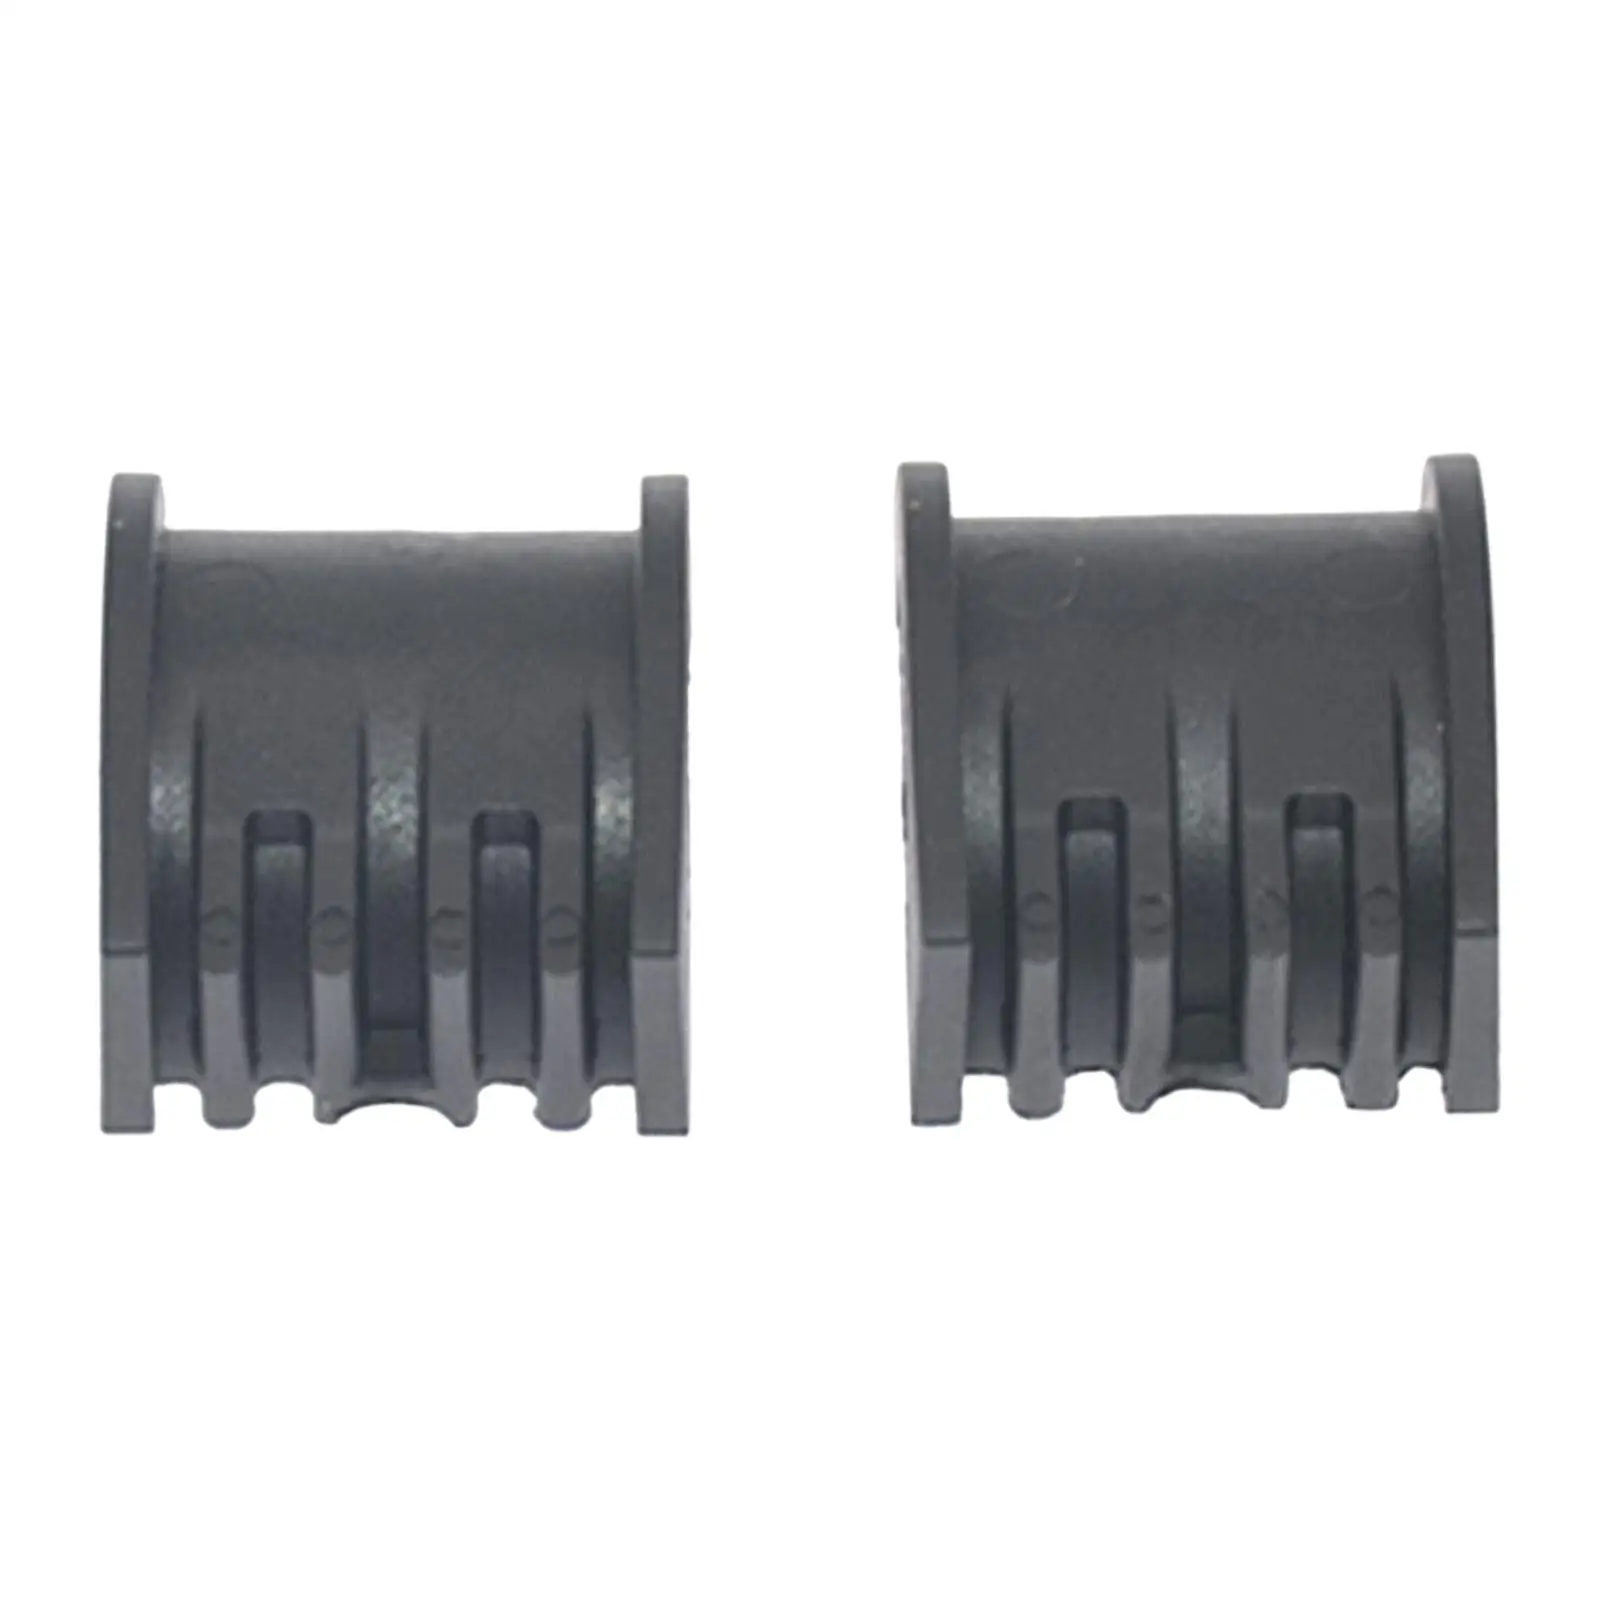 2 Pieces Vehicle Upper Steering Bushing 5439731 5438903 for Polaris Sportsman 300 600 700 Replace Spare Parts